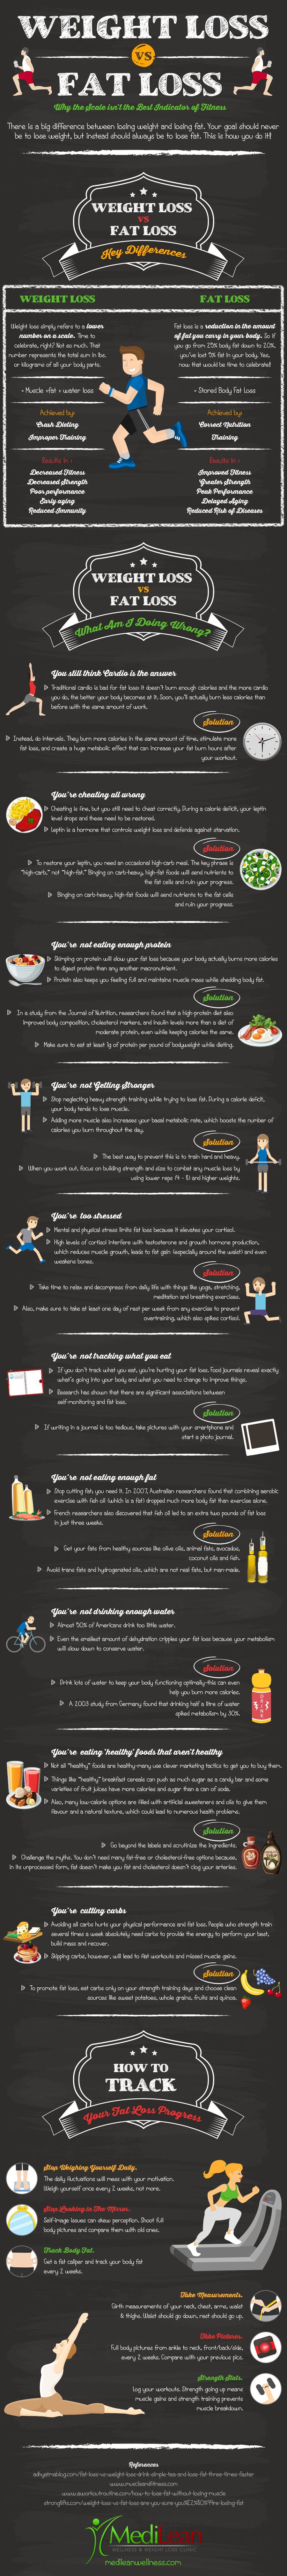 Weight Loss vs Fat Loss: Why Your Scale Isn’t the Best Indicator of Fitness – Infographic